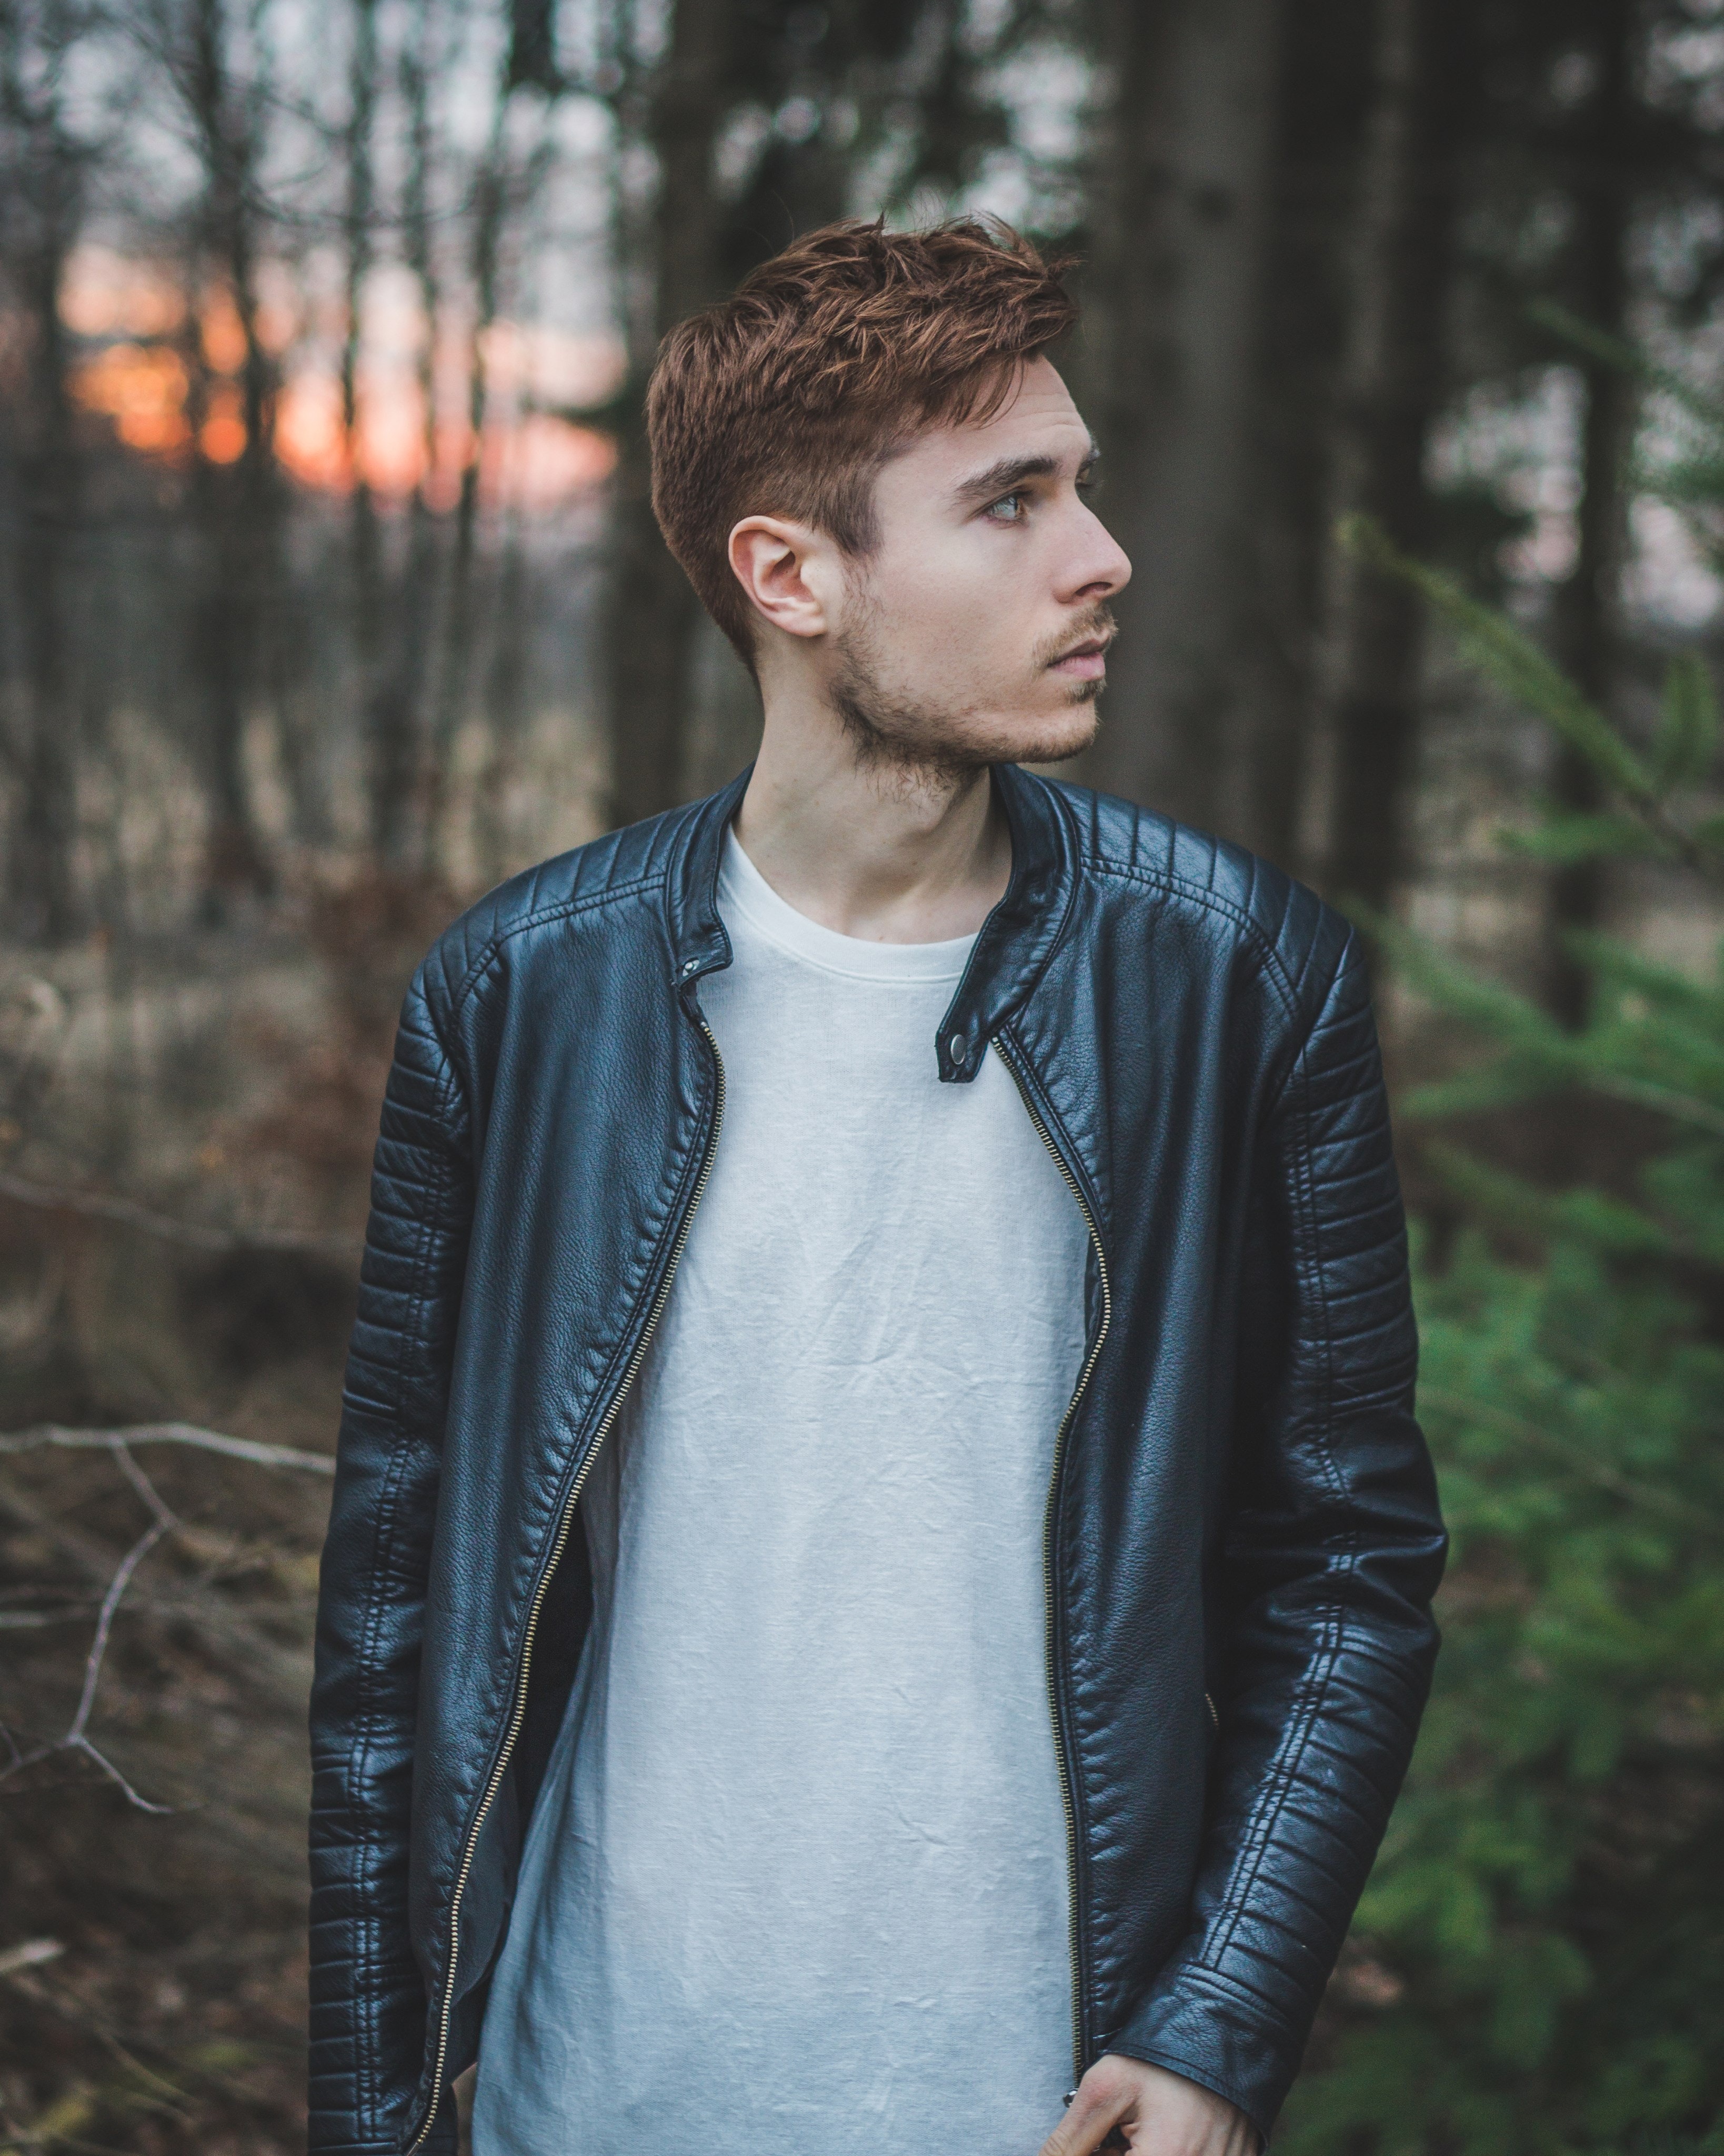 Photo of a Man Wearing Black Leather Jacket, Adult, Outdoors, Woods, Wear, HQ Photo